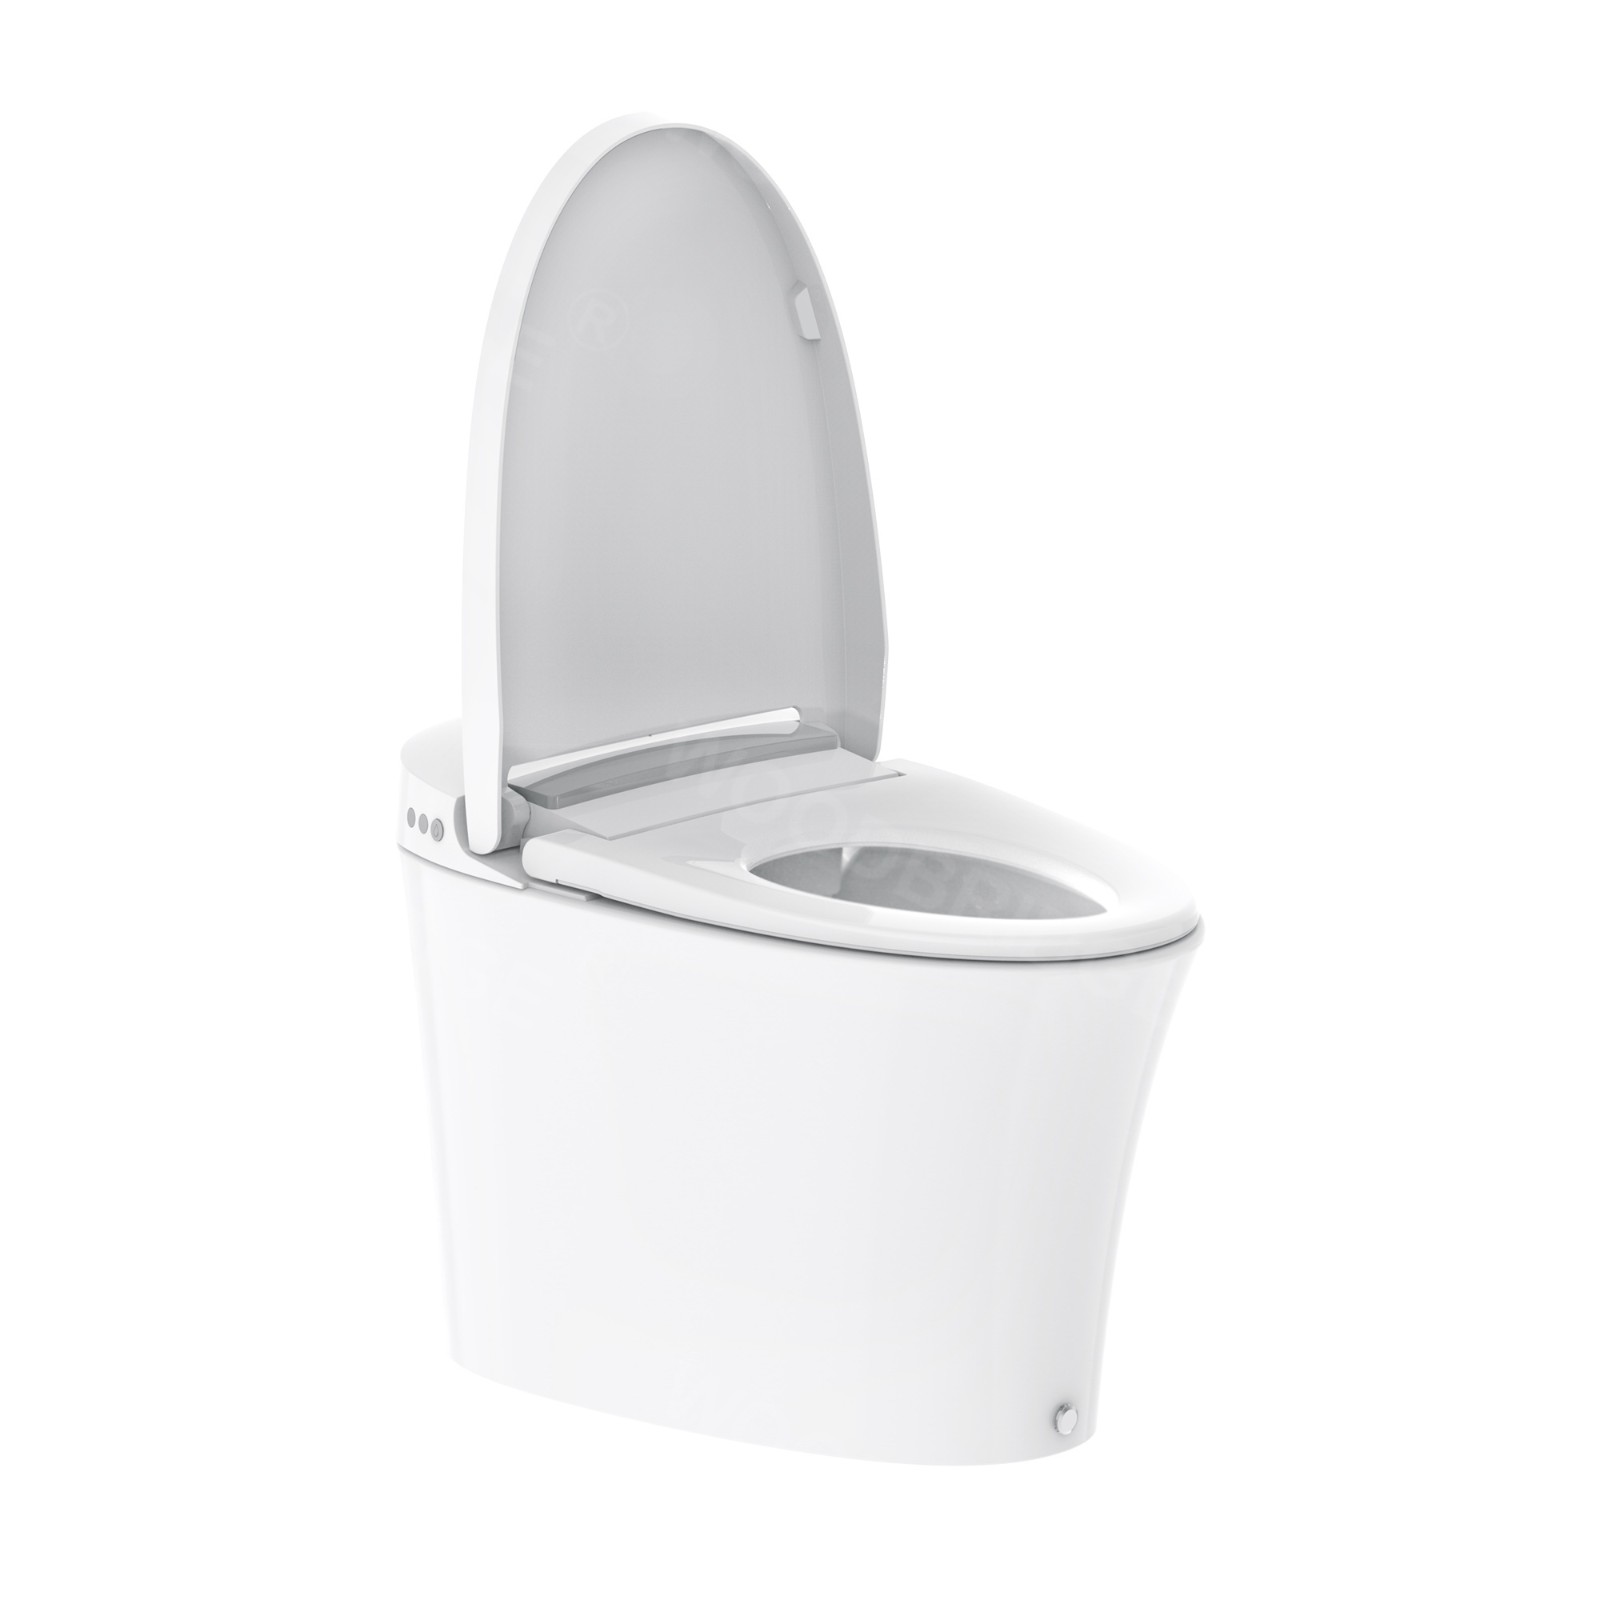  WOODBRIDGE BW5100S One Piece Modern,Slim, Tankless and High Efficiency Toilet with Battery Operated Auto Flushing_5057